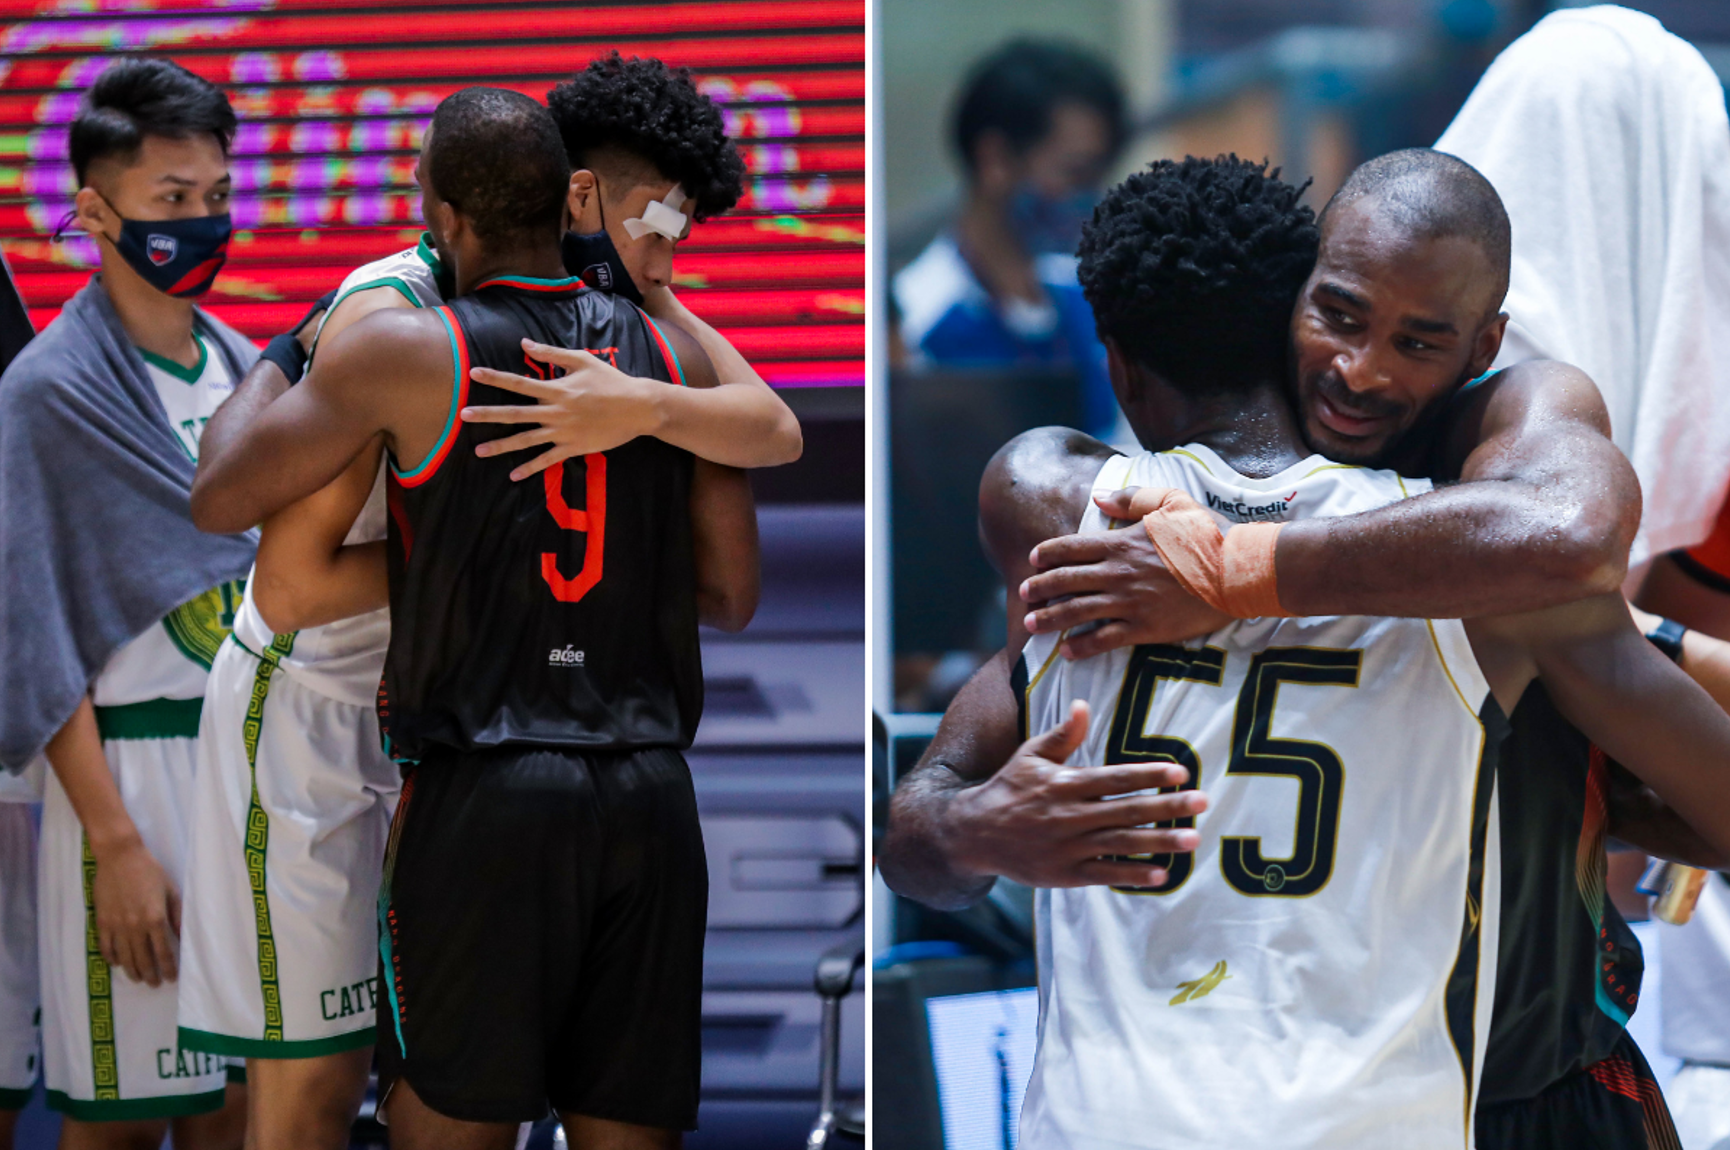 Akeem Scoot of Danang Dragons hugs his opponents following a collision at the VBA Premier Bubble Games. Photo: VBA